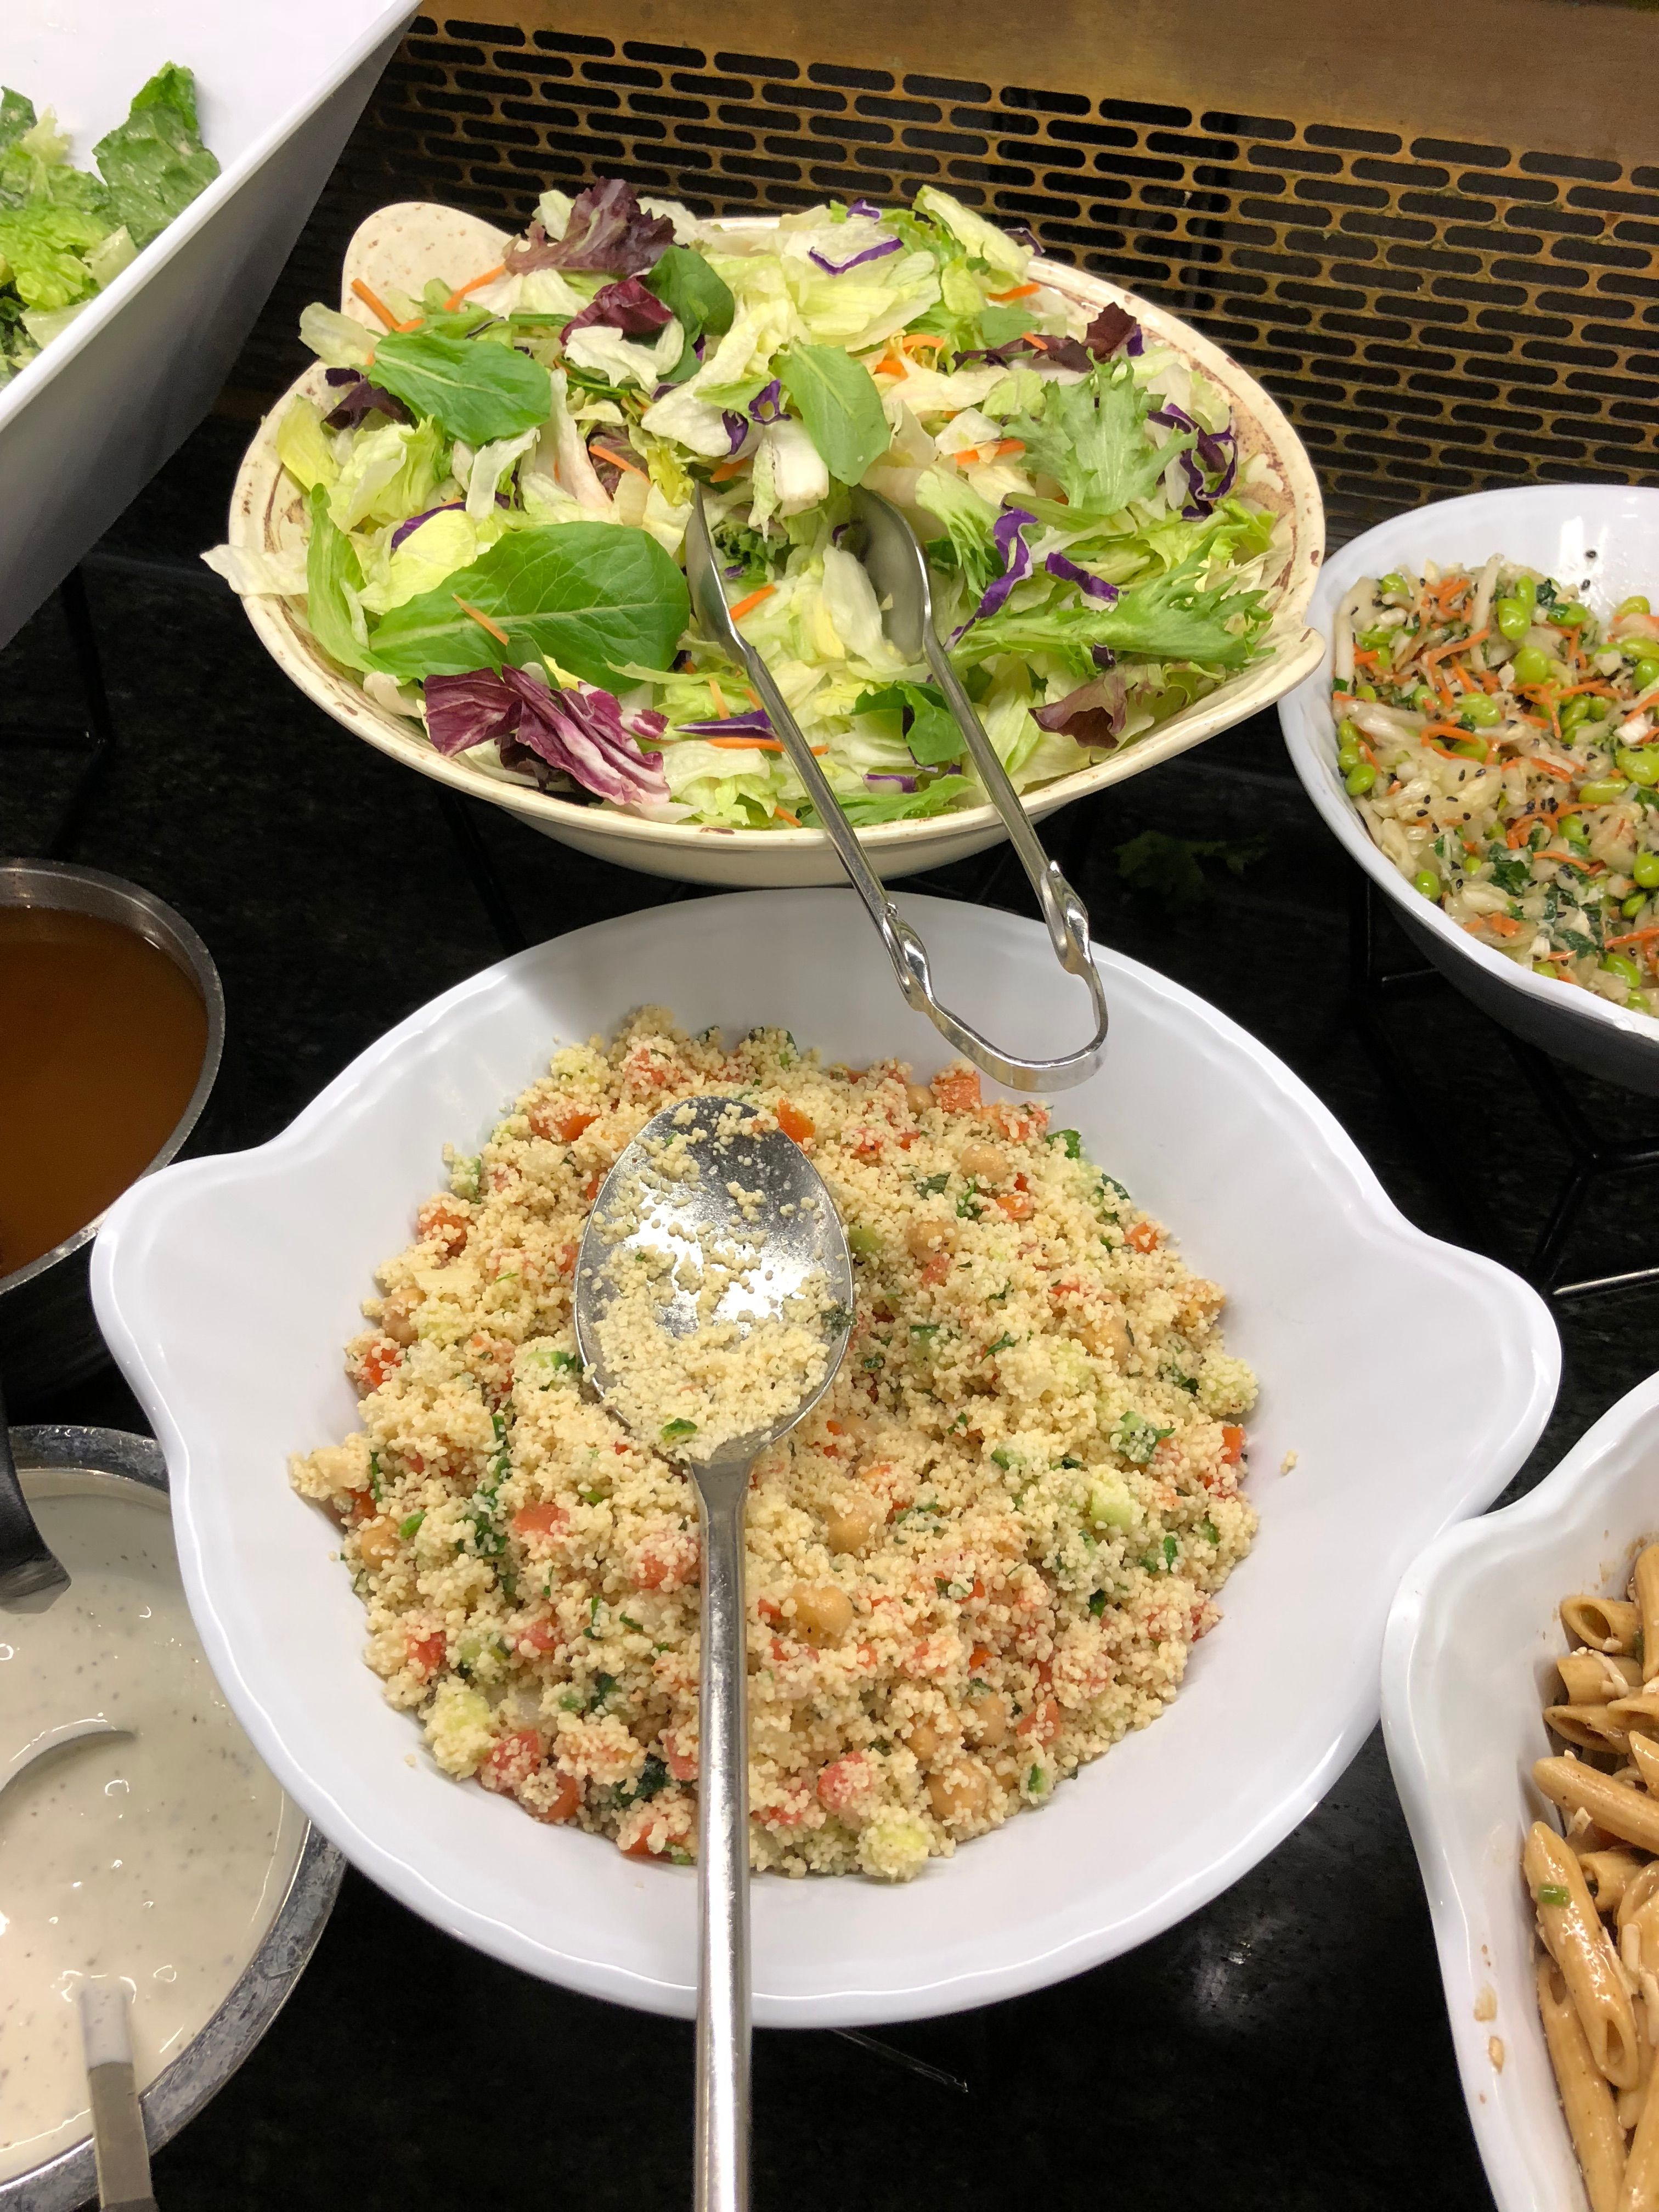 Moroccan Couscous Salad Lunch Buffet in Walt Disney World at Crystal Palace!.jpg